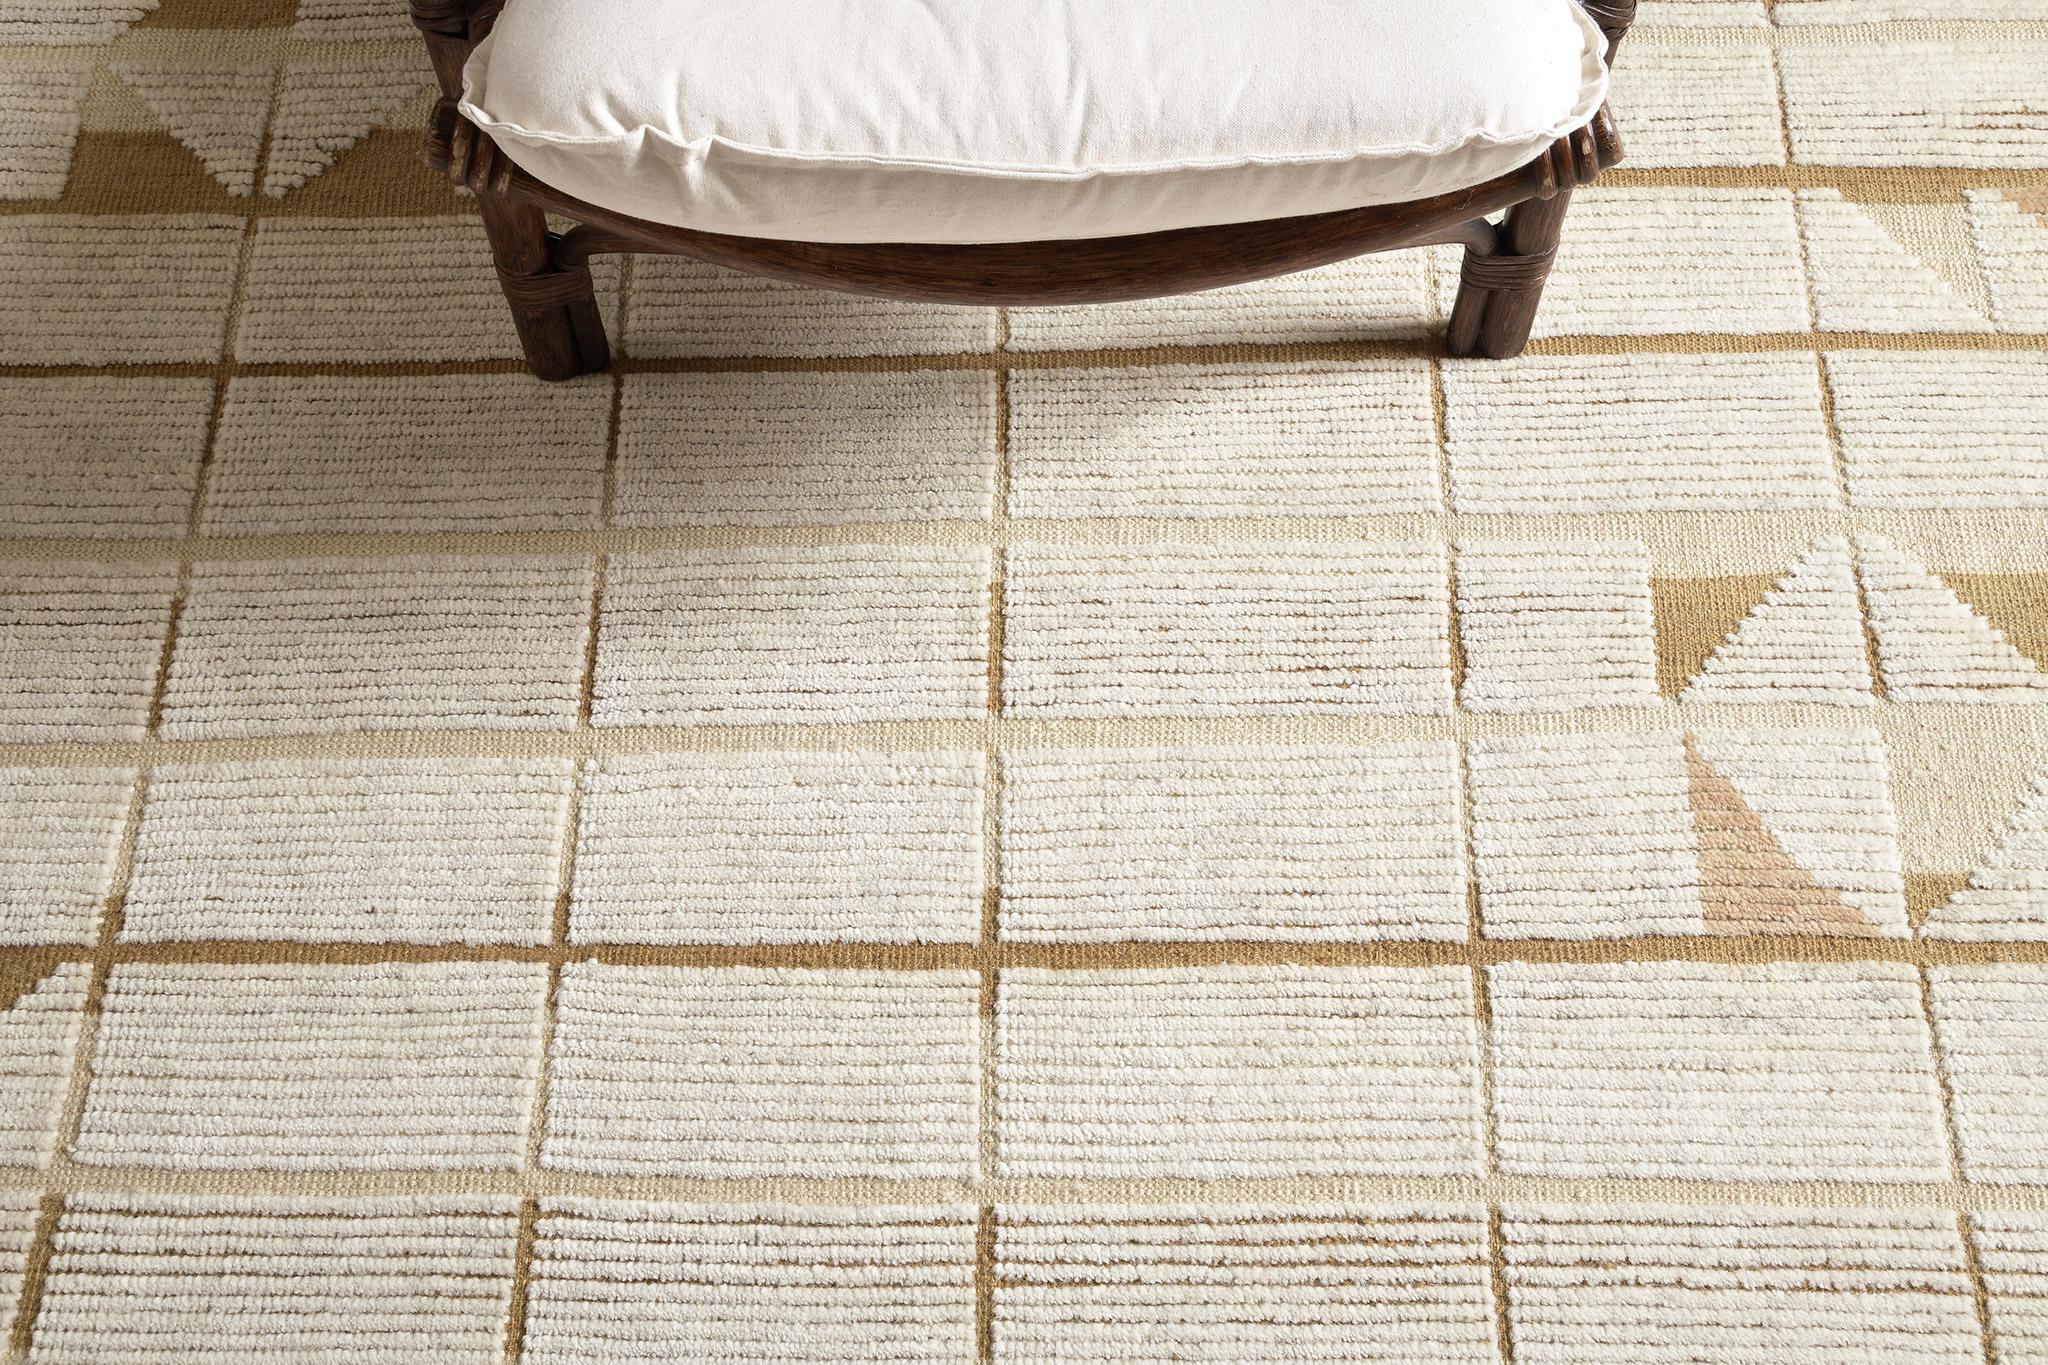 Bouchet’ in Estancia Collection features rectangular grids running along the entirety of this breathtaking rug. Rendered in the earthy shades of beige and tortilla, features the puzzle like forming lozenges which creates statement and character in